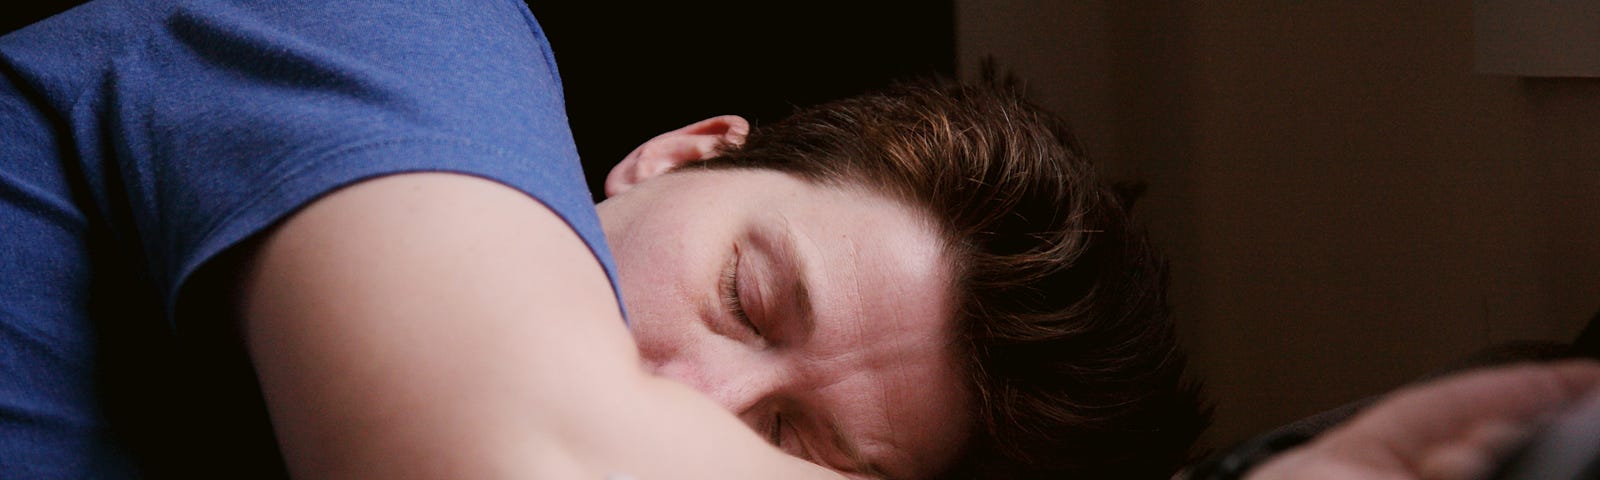 Man wearing a blue shirt sleeping on his side with his head resting on one arm.